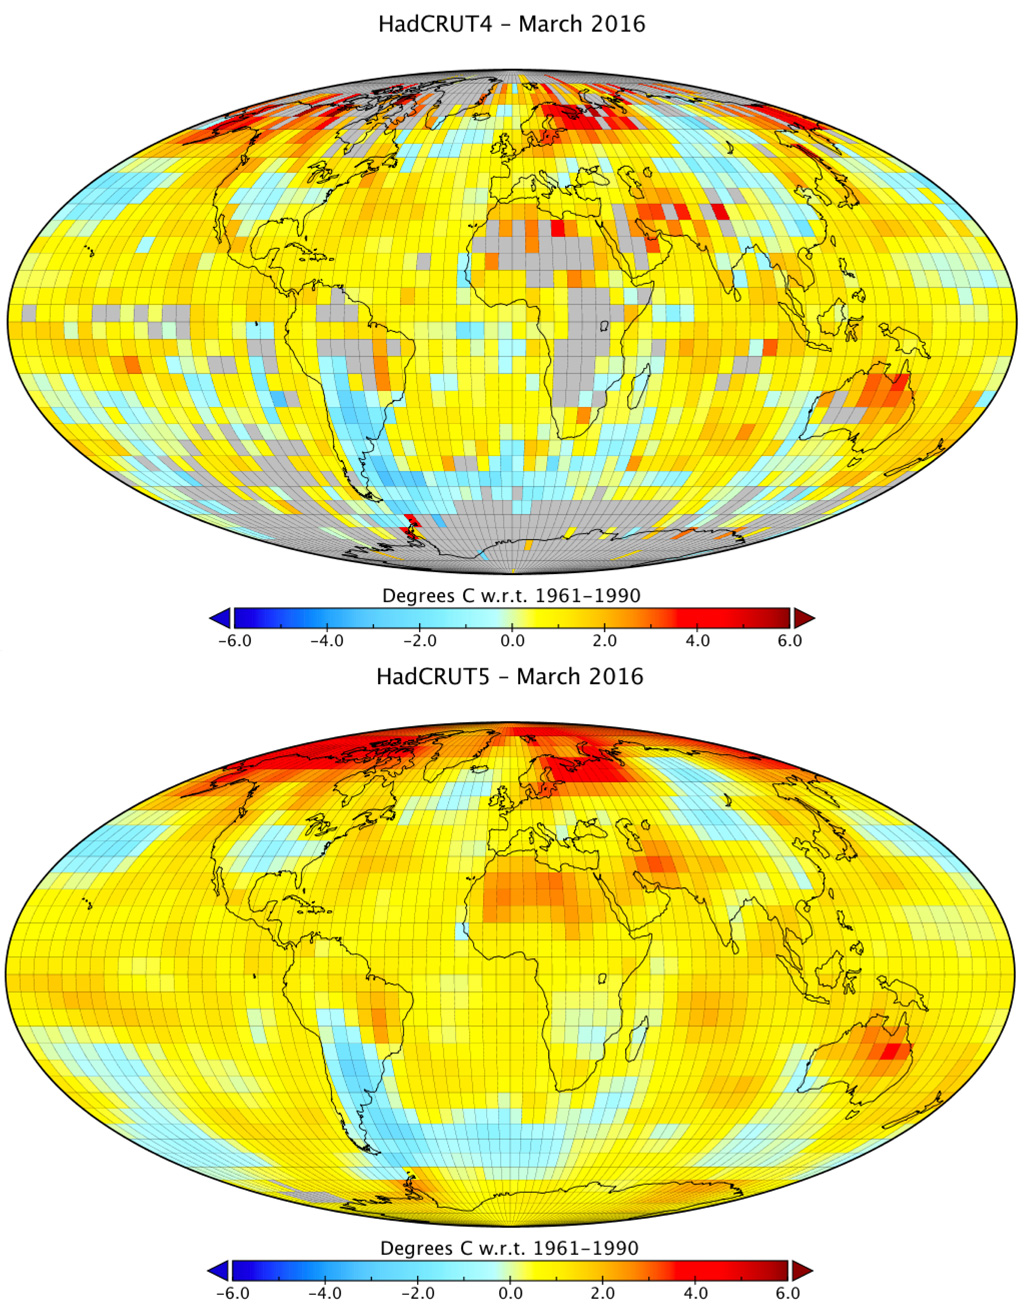 Gridded global surface temperatures in HadCRUT4 and HadCRUT5 analysis for March 2016